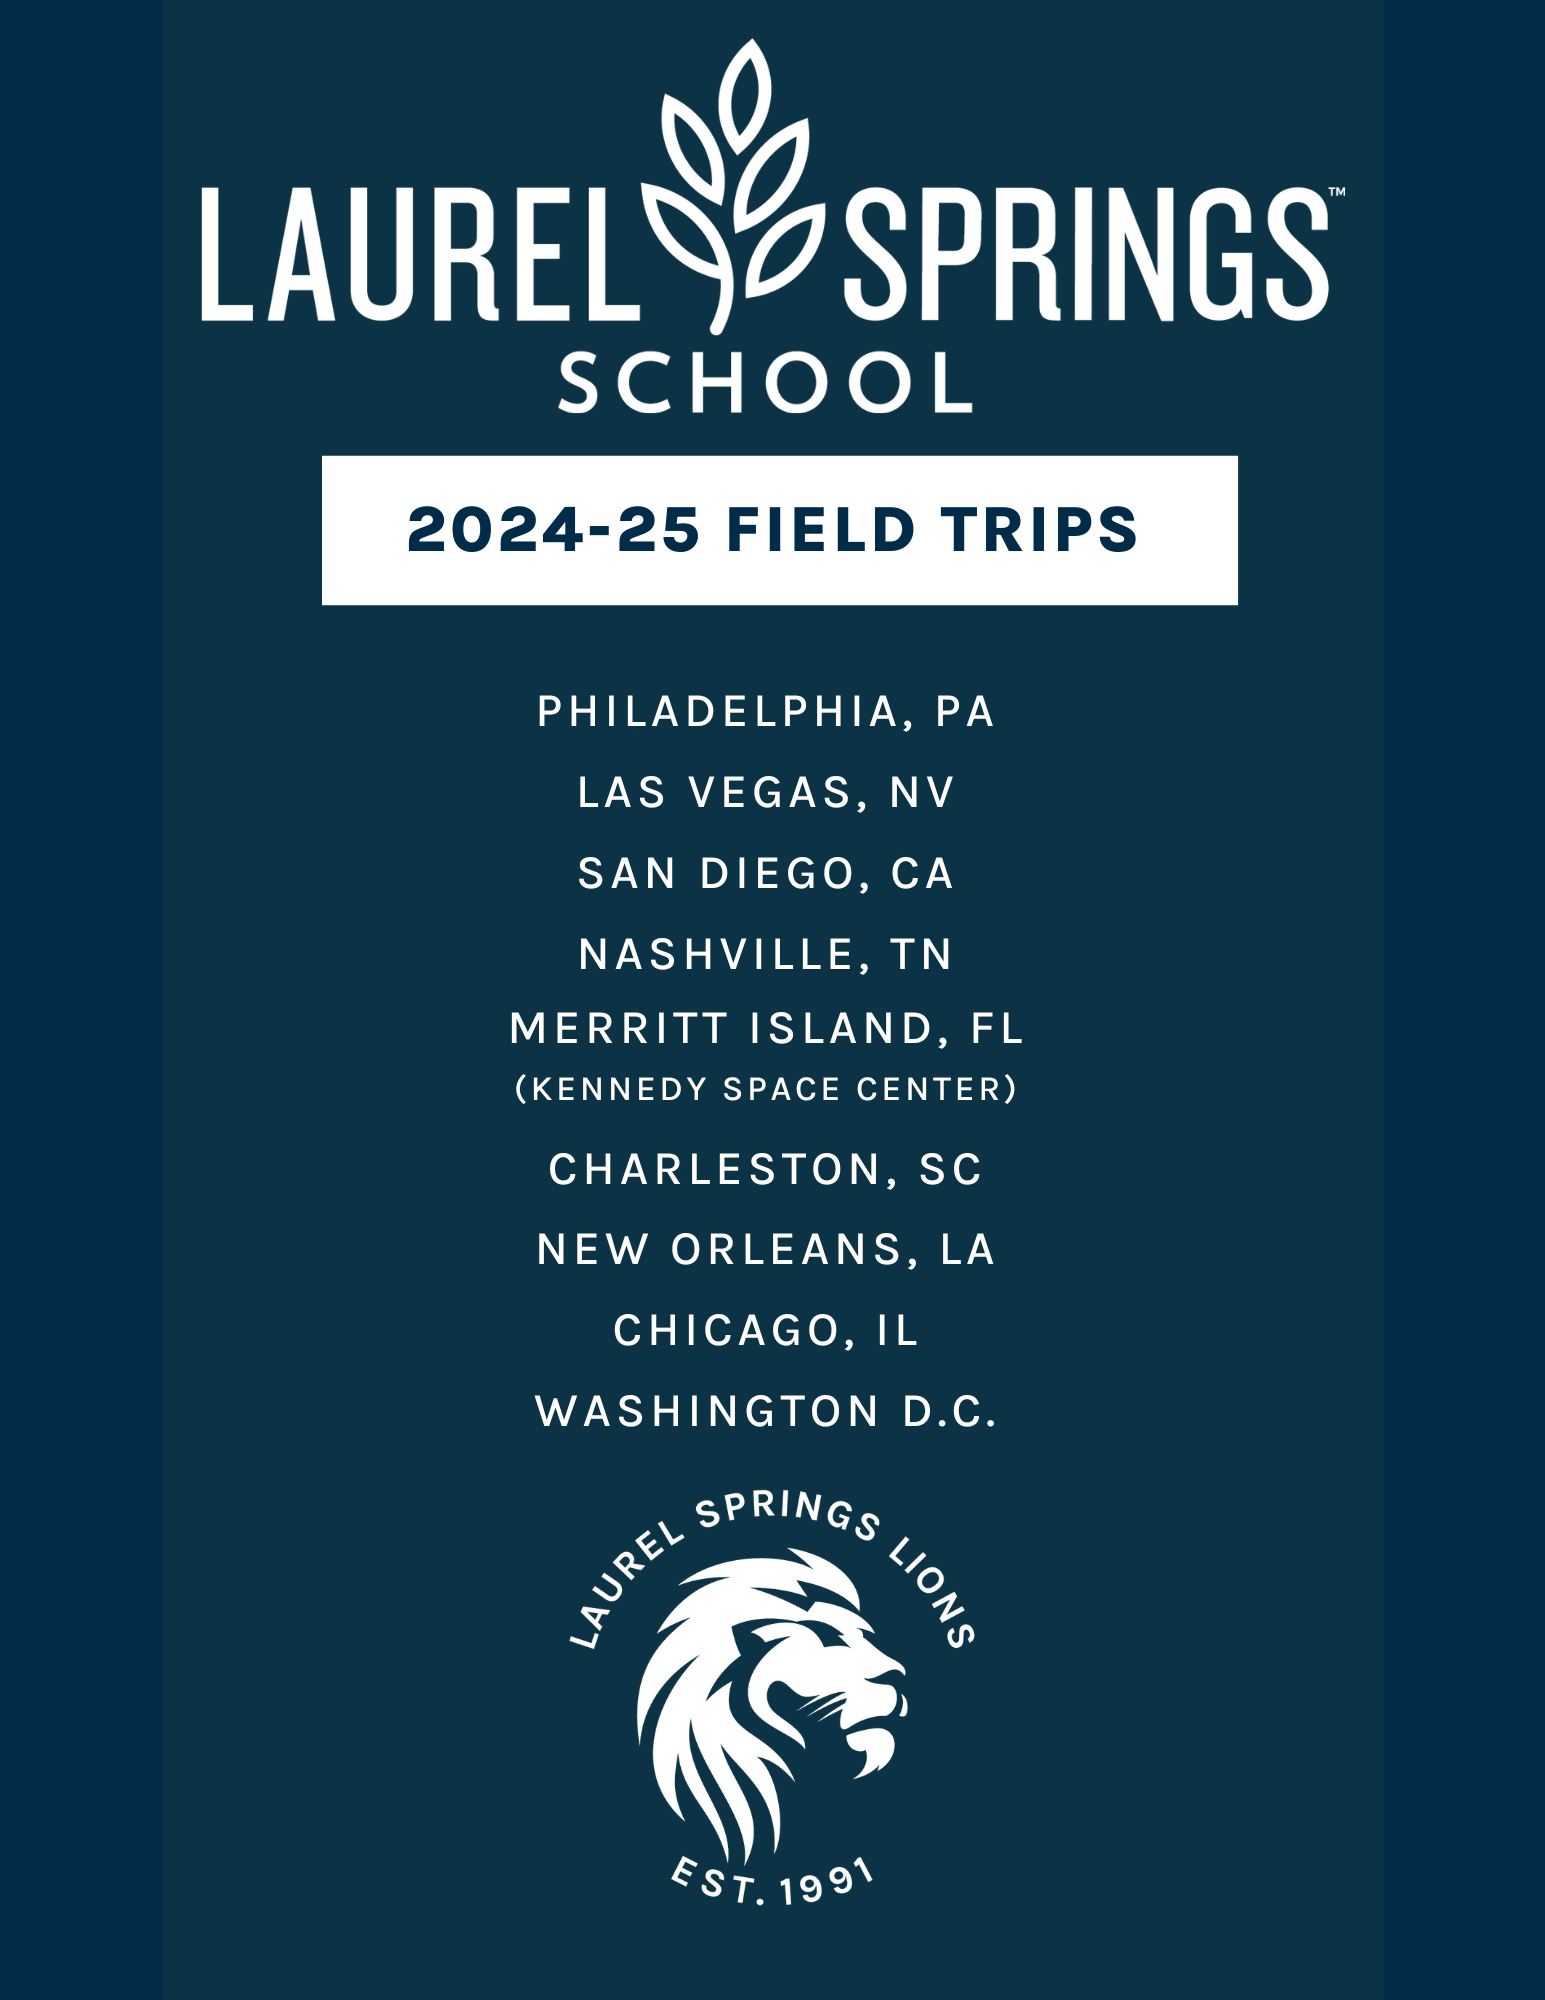 List of fields trips that Laurel Springs will have in 2024 and 2024